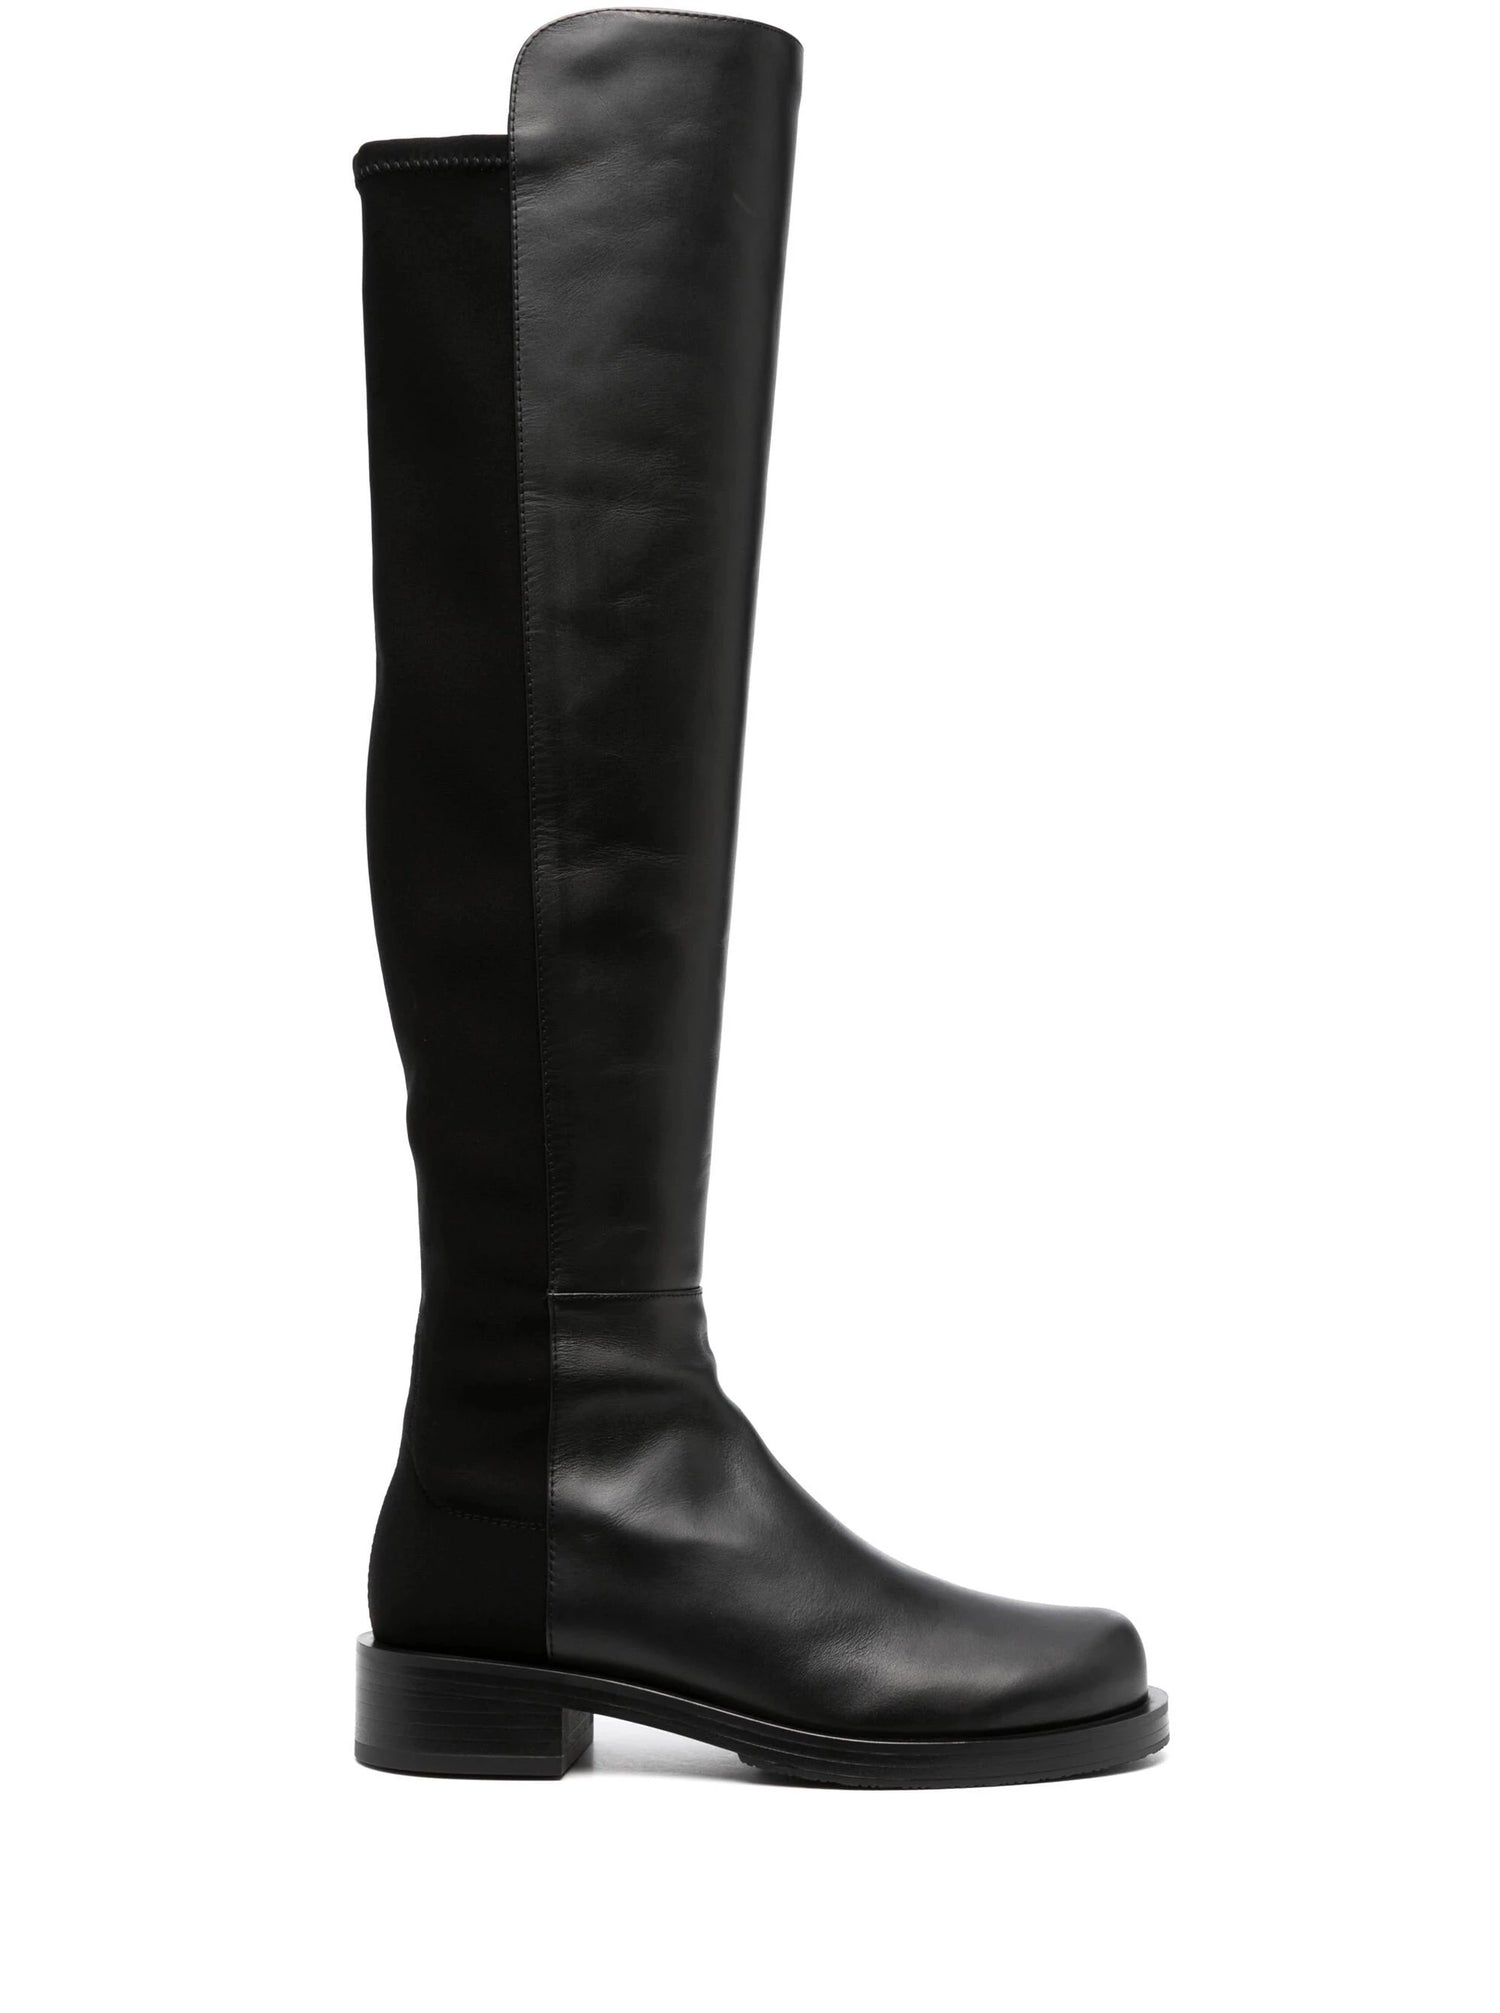 5050 Bold 35mm leather boot, black